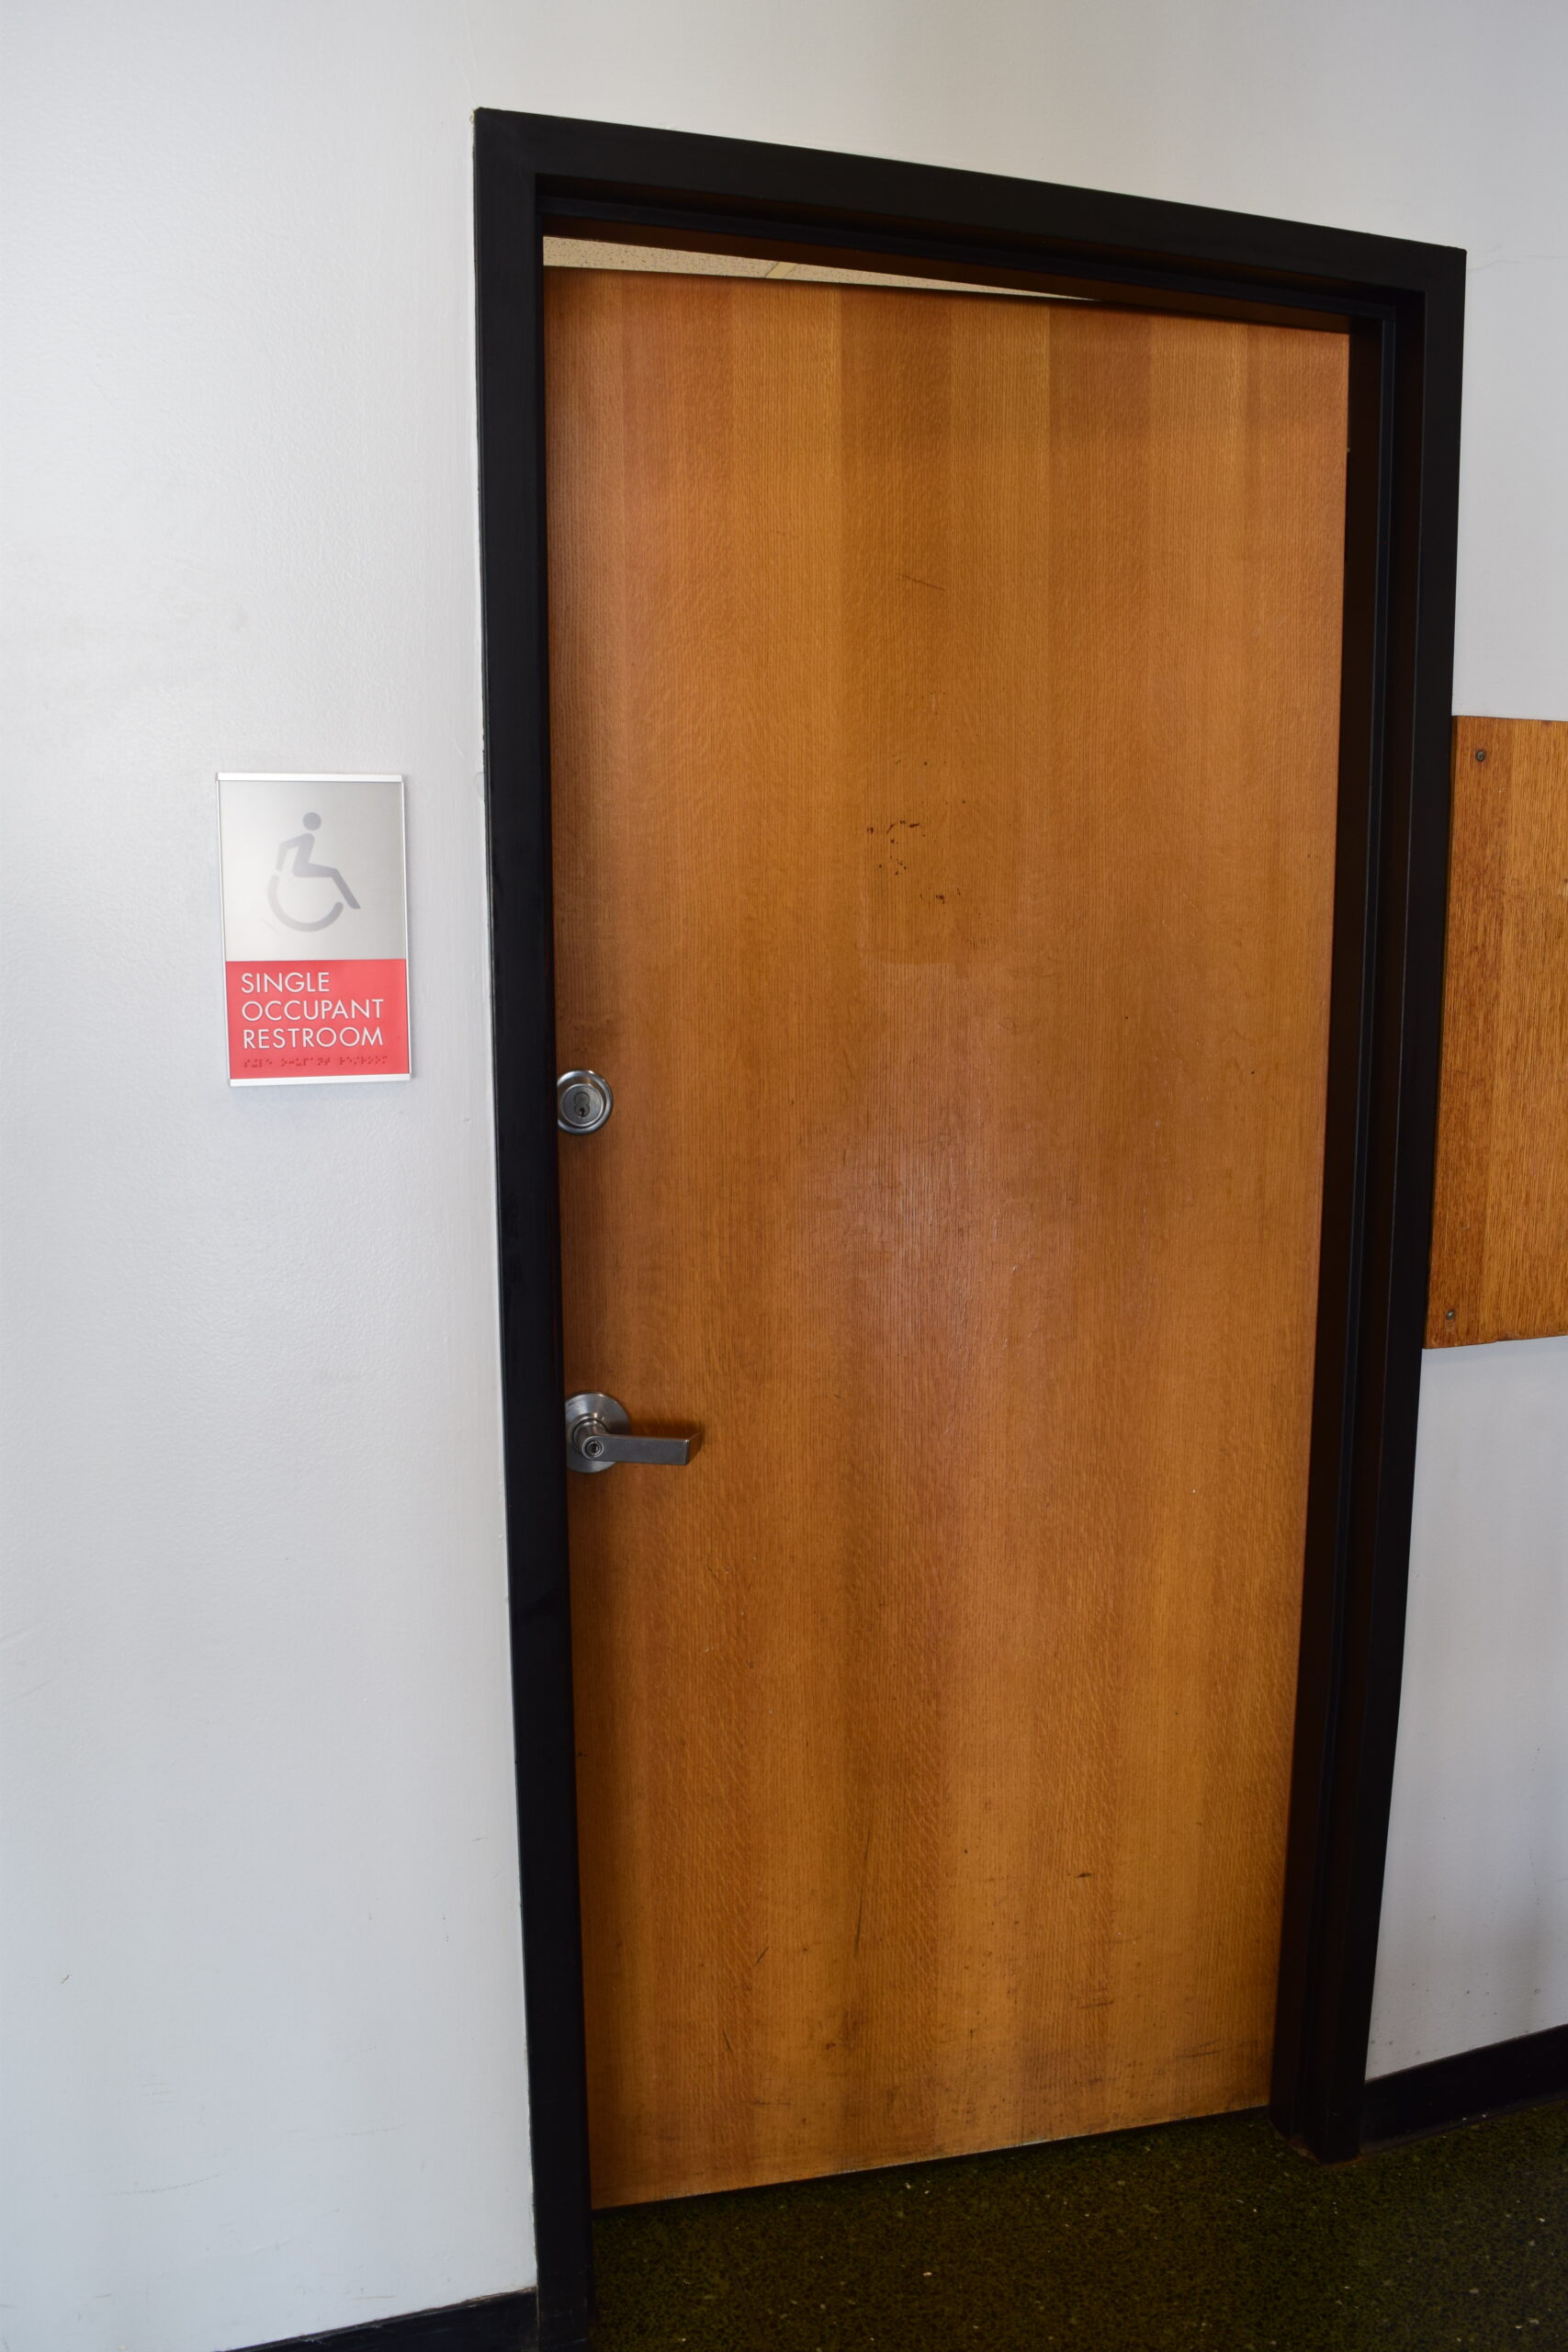 A wooden door opens inward to a single-use bathroom, with a lever handle low on the left of the door, and a deadbolt lock above it. A sign next to the door has an accessibility icon and says "Single occupant restroom."